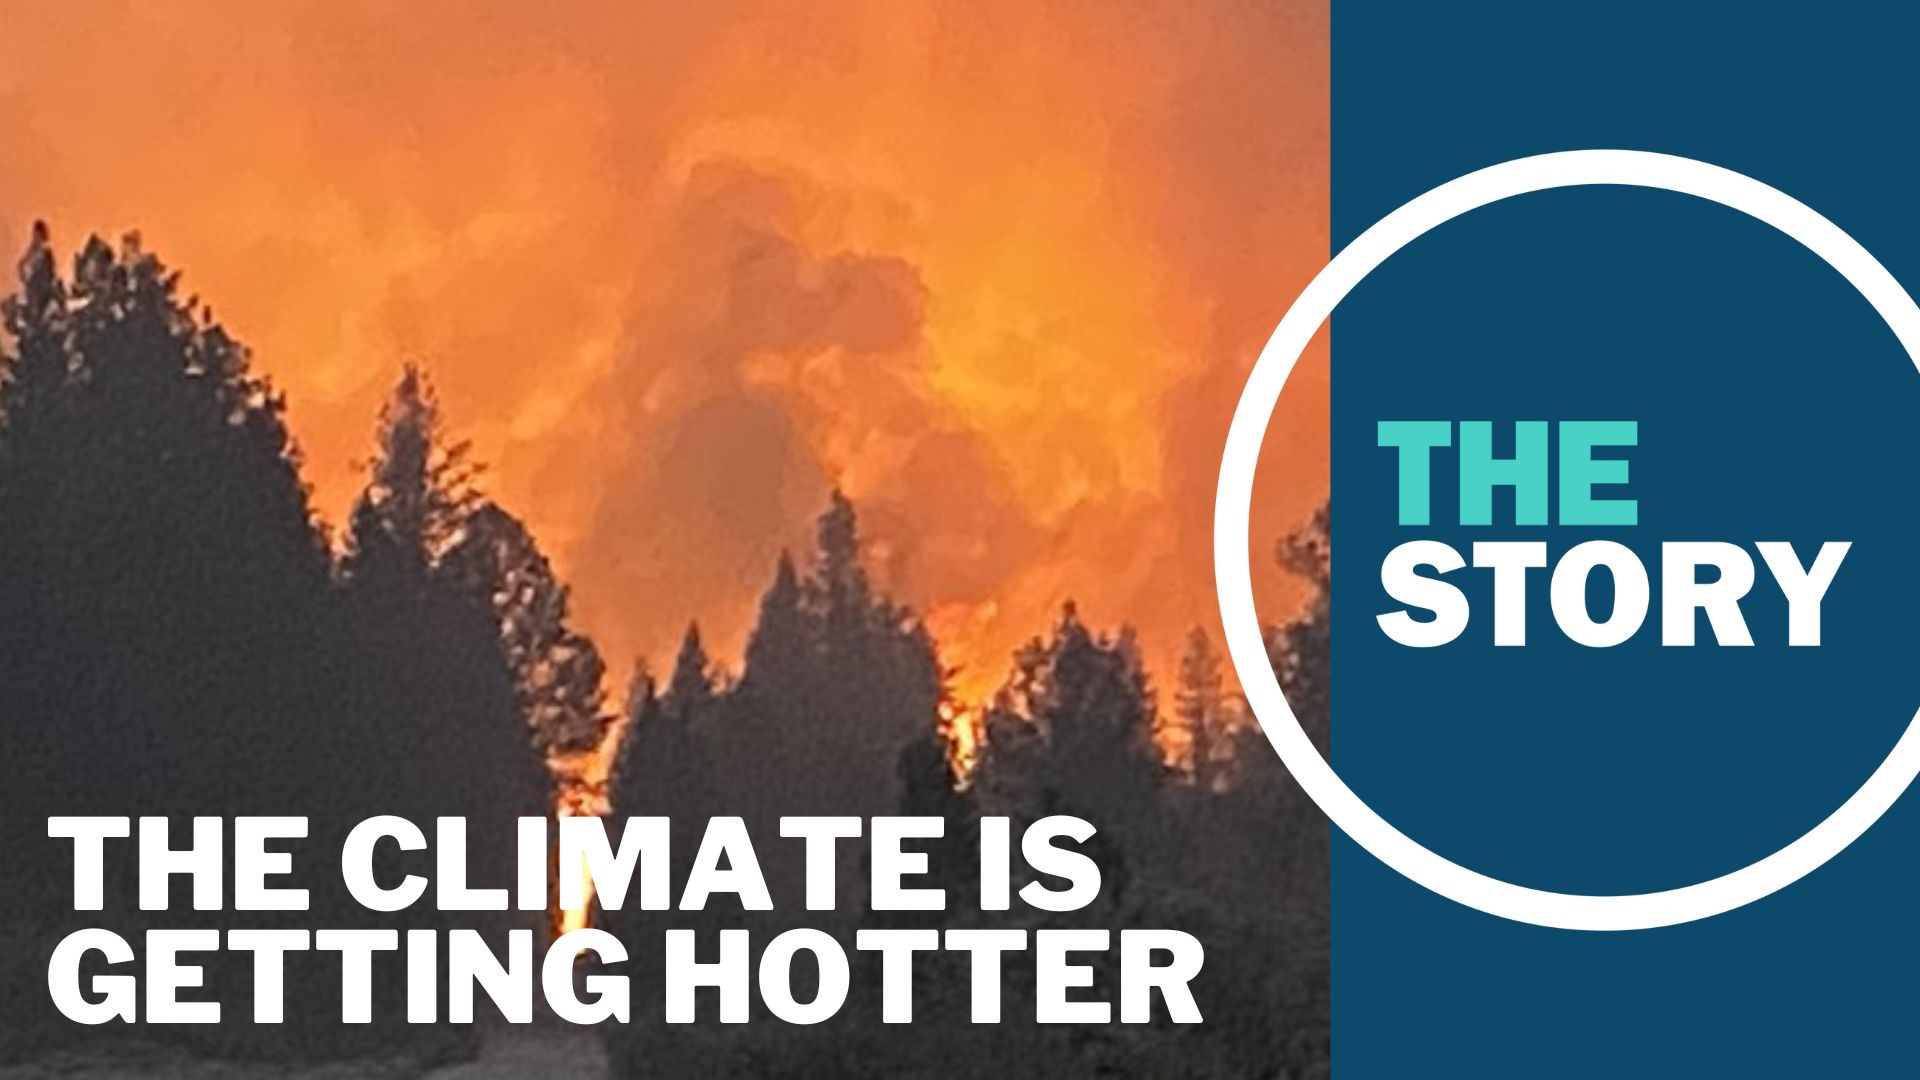 The report confirmed what lots of Oregonians already know: the climate is getting hotter.